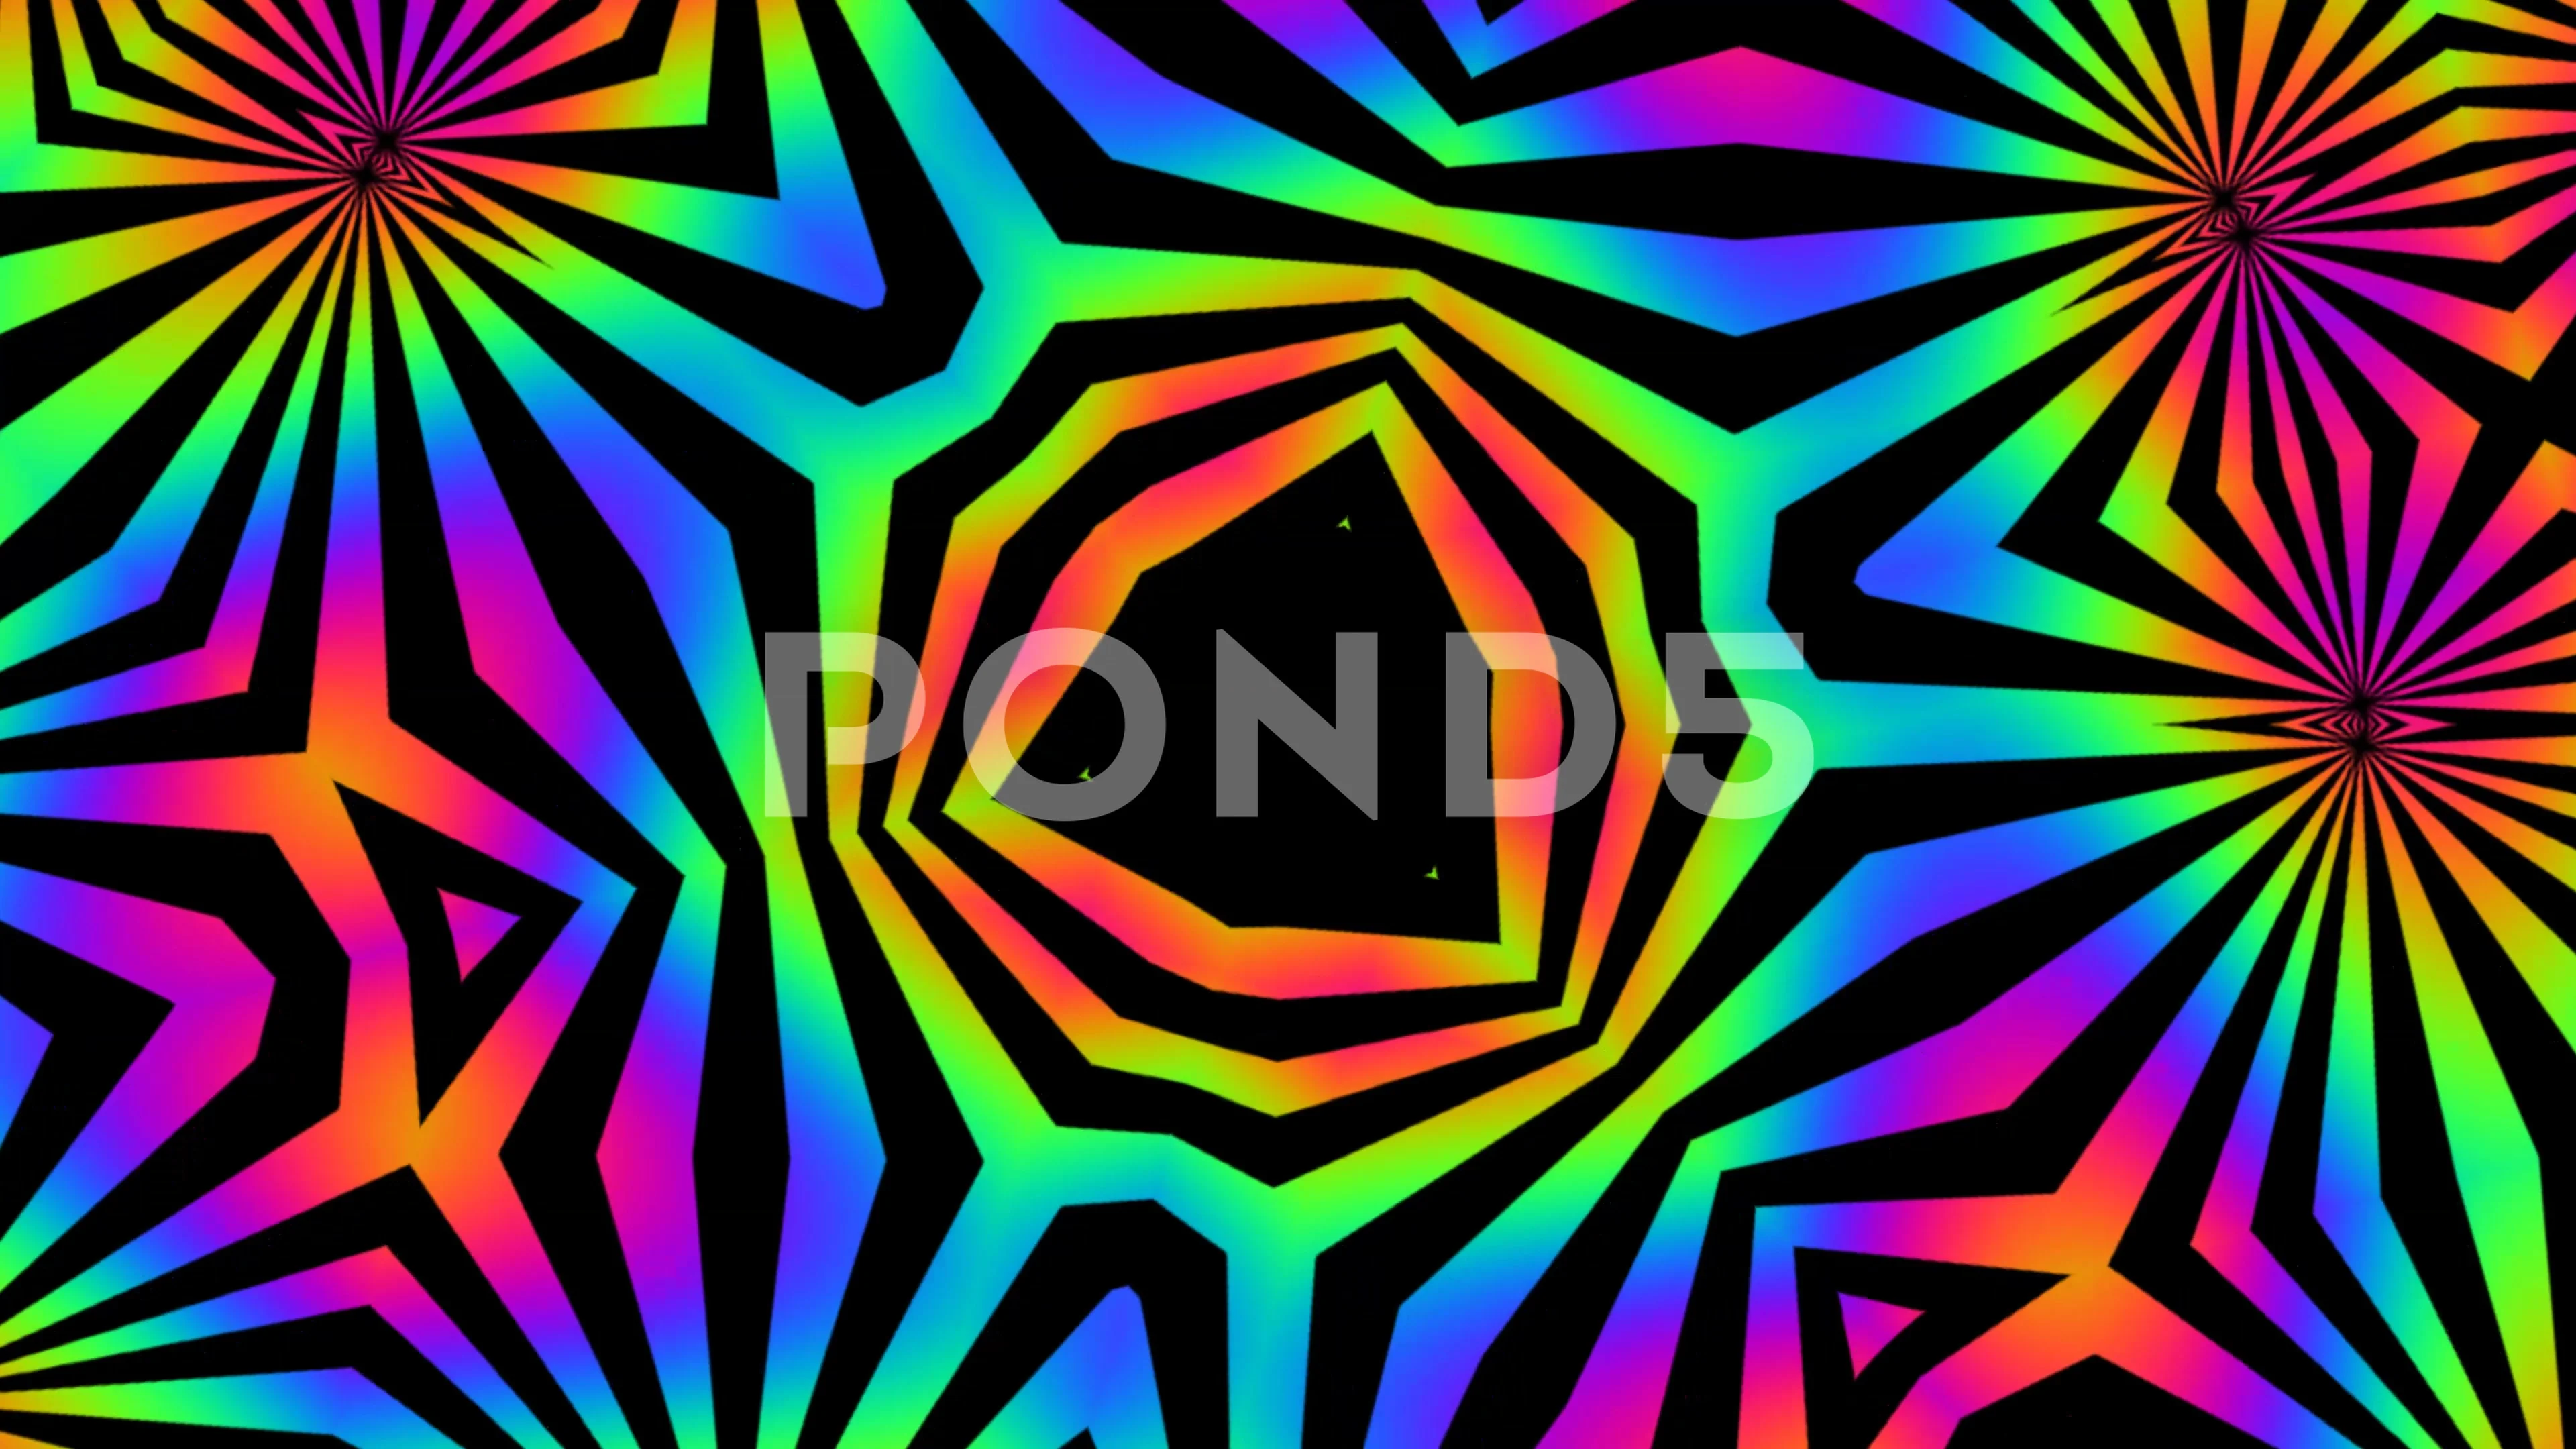 psychedelic geometric patterns